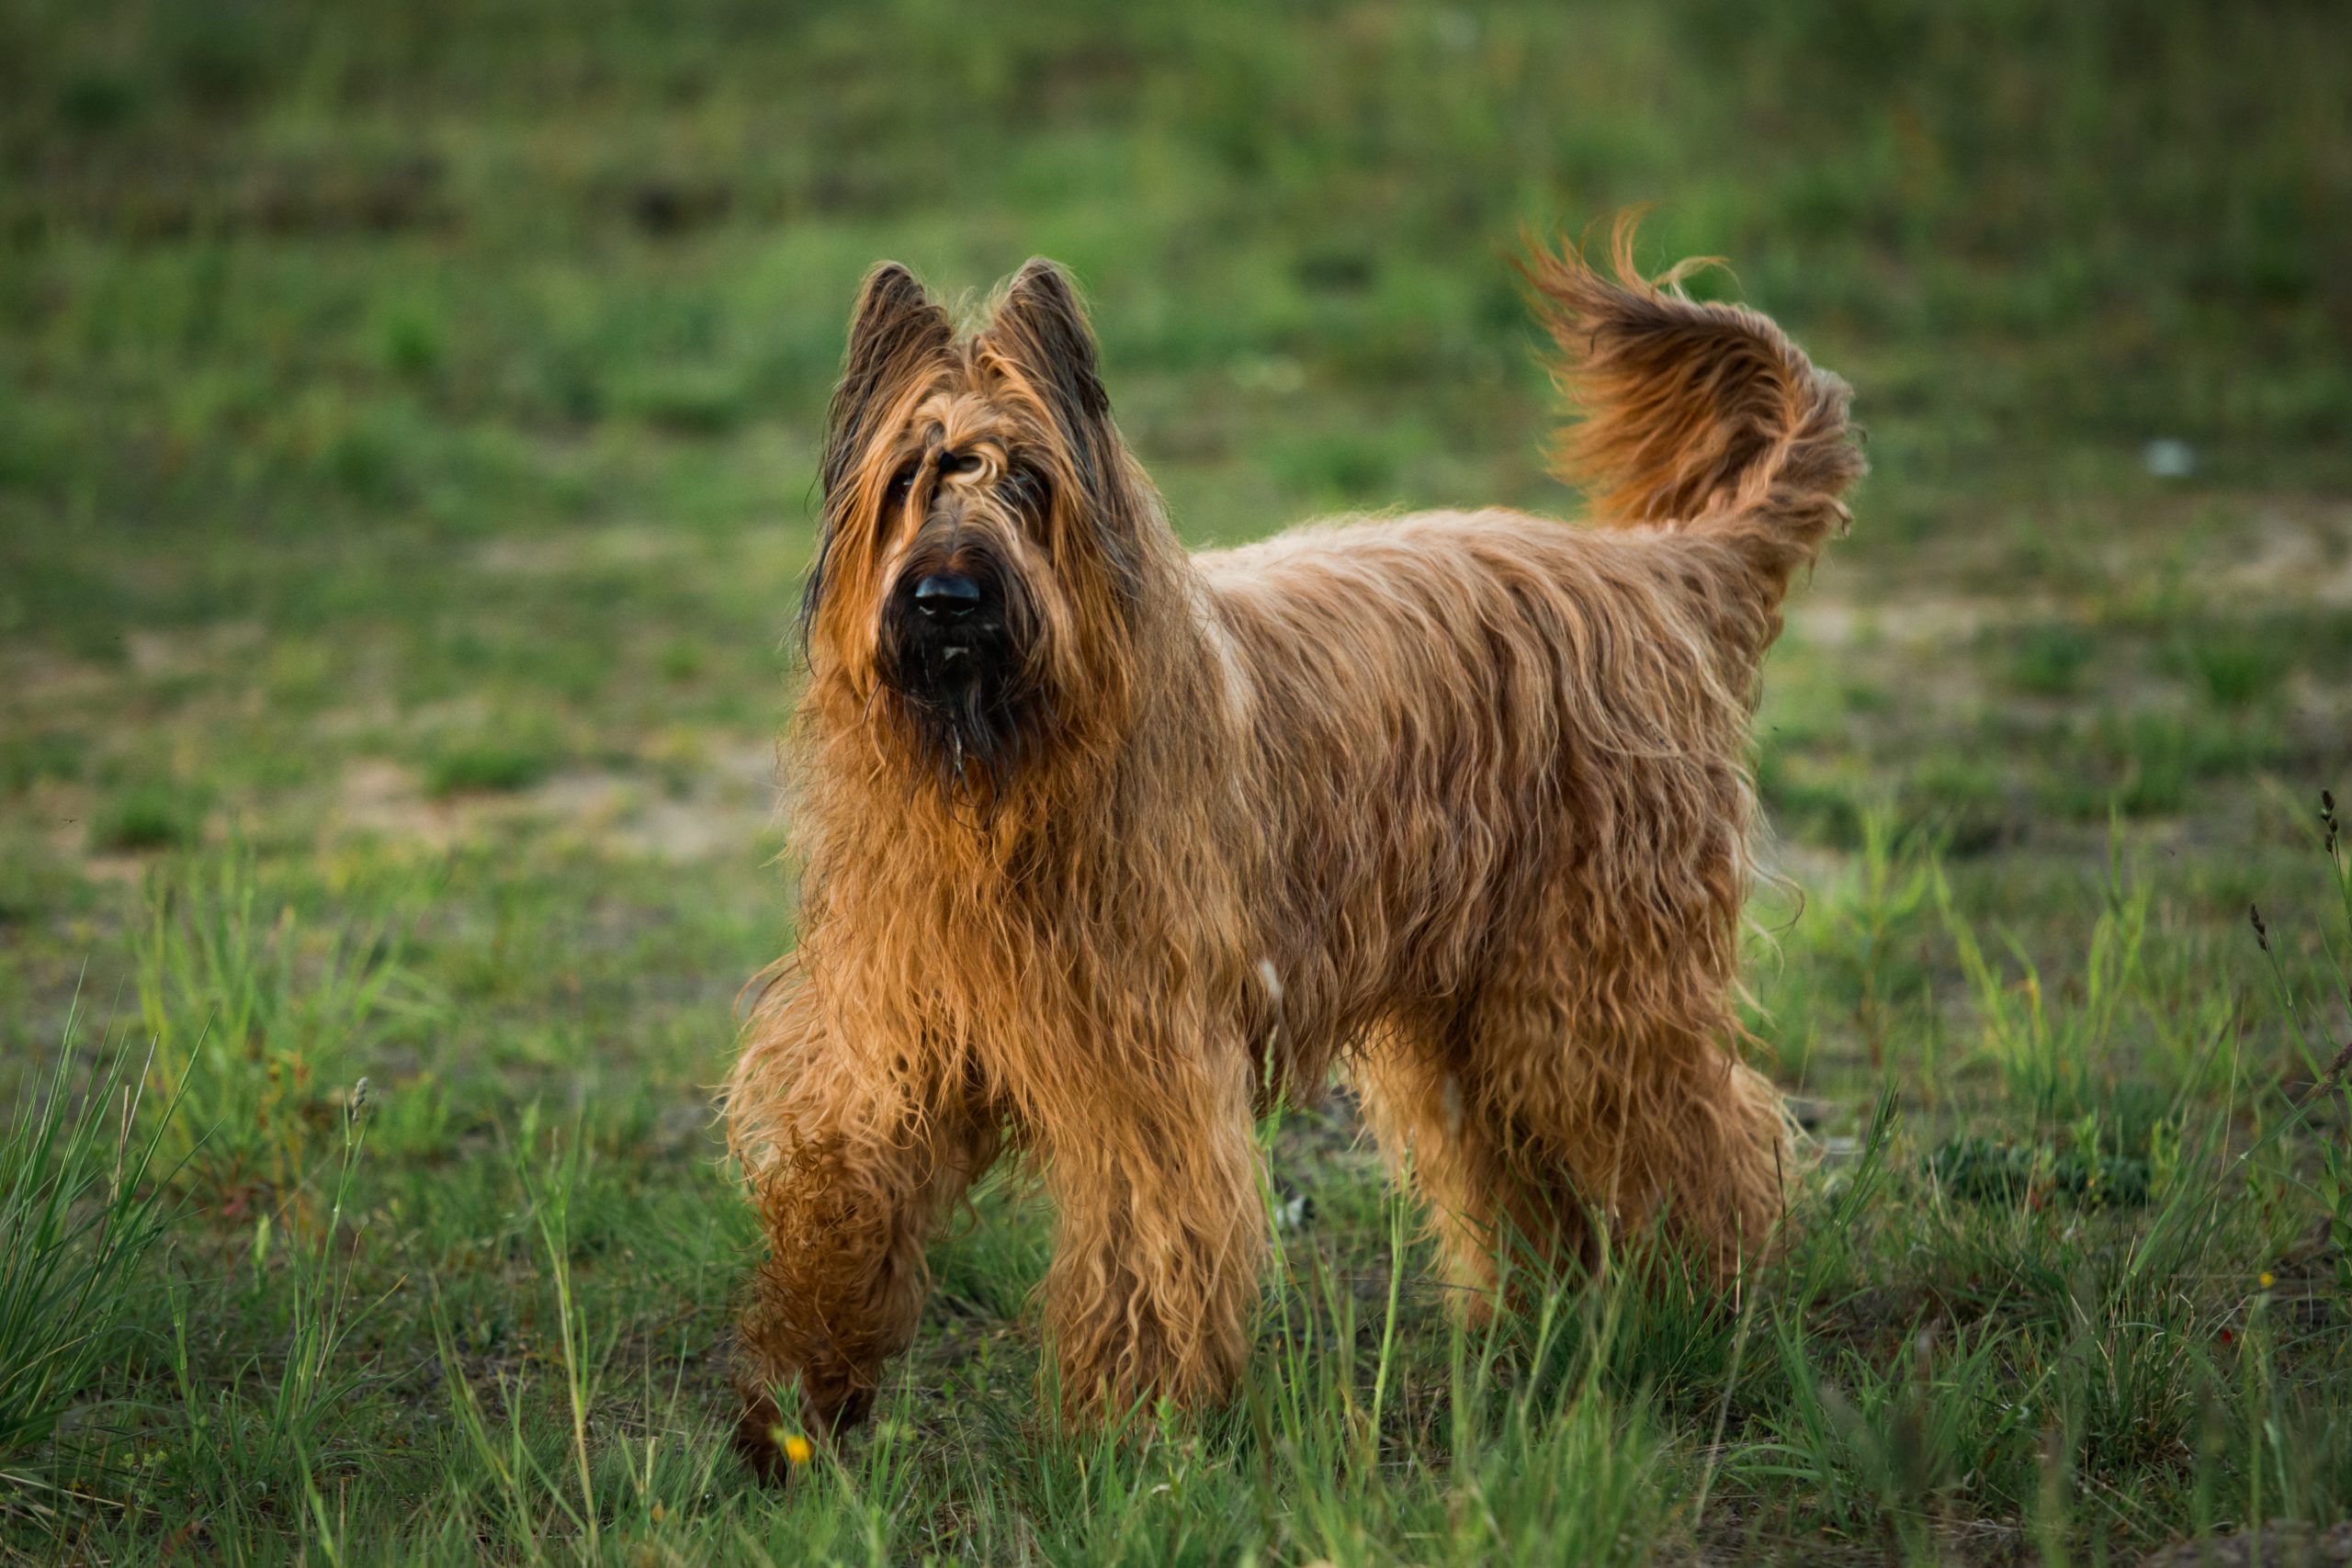 Berger,De,Brie,Briard,Dog,At,Walk,On,A,Meadow,